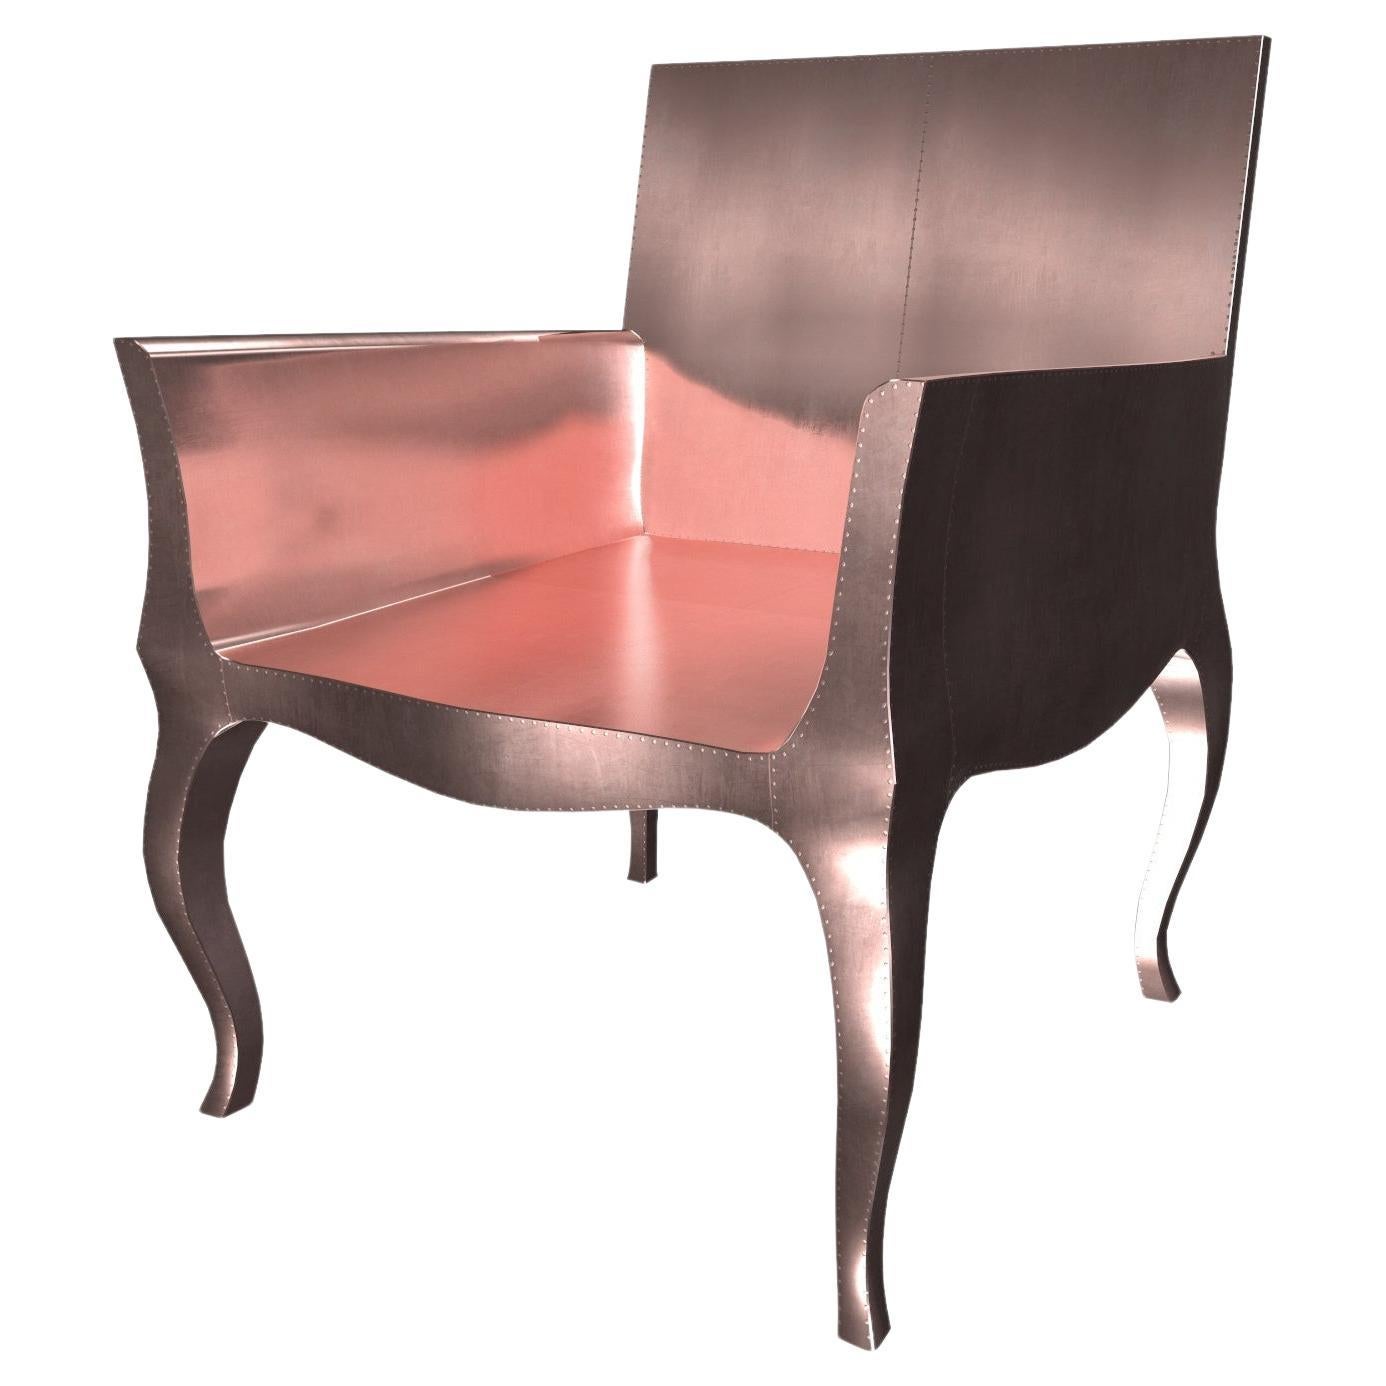 Art Deco Style Chairs in Smooth Copper by Paul Mathieu for S. Odegard